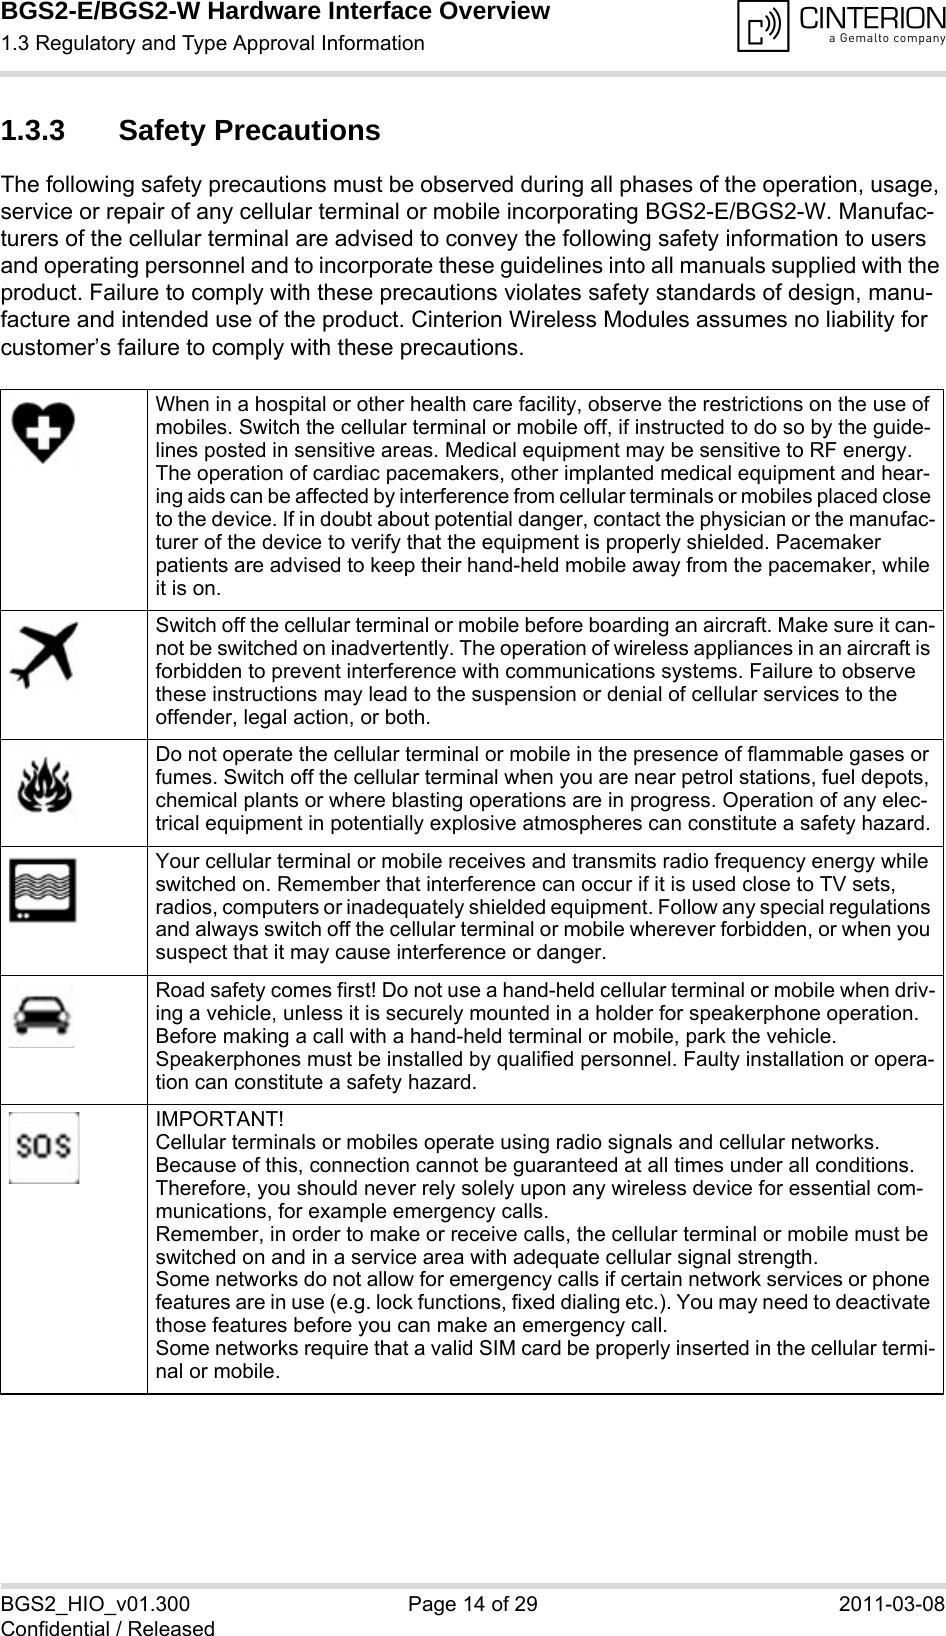 BGS2-E/BGS2-W Hardware Interface Overview1.3 Regulatory and Type Approval Information14BGS2_HIO_v01.300 Page 14 of 29 2011-03-08Confidential / Released1.3.3 Safety PrecautionsThe following safety precautions must be observed during all phases of the operation, usage, service or repair of any cellular terminal or mobile incorporating BGS2-E/BGS2-W. Manufac-turers of the cellular terminal are advised to convey the following safety information to users and operating personnel and to incorporate these guidelines into all manuals supplied with the product. Failure to comply with these precautions violates safety standards of design, manu-facture and intended use of the product. Cinterion Wireless Modules assumes no liability for customer’s failure to comply with these precautions.When in a hospital or other health care facility, observe the restrictions on the use of mobiles. Switch the cellular terminal or mobile off, if instructed to do so by the guide-lines posted in sensitive areas. Medical equipment may be sensitive to RF energy. The operation of cardiac pacemakers, other implanted medical equipment and hear-ing aids can be affected by interference from cellular terminals or mobiles placed close to the device. If in doubt about potential danger, contact the physician or the manufac-turer of the device to verify that the equipment is properly shielded. Pacemaker patients are advised to keep their hand-held mobile away from the pacemaker, while it is on. Switch off the cellular terminal or mobile before boarding an aircraft. Make sure it can-not be switched on inadvertently. The operation of wireless appliances in an aircraft is forbidden to prevent interference with communications systems. Failure to observe these instructions may lead to the suspension or denial of cellular services to the offender, legal action, or both.Do not operate the cellular terminal or mobile in the presence of flammable gases or fumes. Switch off the cellular terminal when you are near petrol stations, fuel depots, chemical plants or where blasting operations are in progress. Operation of any elec-trical equipment in potentially explosive atmospheres can constitute a safety hazard.Your cellular terminal or mobile receives and transmits radio frequency energy while switched on. Remember that interference can occur if it is used close to TV sets, radios, computers or inadequately shielded equipment. Follow any special regulations and always switch off the cellular terminal or mobile wherever forbidden, or when you suspect that it may cause interference or danger.Road safety comes first! Do not use a hand-held cellular terminal or mobile when driv-ing a vehicle, unless it is securely mounted in a holder for speakerphone operation. Before making a call with a hand-held terminal or mobile, park the vehicle. Speakerphones must be installed by qualified personnel. Faulty installation or opera-tion can constitute a safety hazard.IMPORTANT!Cellular terminals or mobiles operate using radio signals and cellular networks. Because of this, connection cannot be guaranteed at all times under all conditions. Therefore, you should never rely solely upon any wireless device for essential com-munications, for example emergency calls. Remember, in order to make or receive calls, the cellular terminal or mobile must be switched on and in a service area with adequate cellular signal strength. Some networks do not allow for emergency calls if certain network services or phone features are in use (e.g. lock functions, fixed dialing etc.). You may need to deactivate those features before you can make an emergency call.Some networks require that a valid SIM card be properly inserted in the cellular termi-nal or mobile.